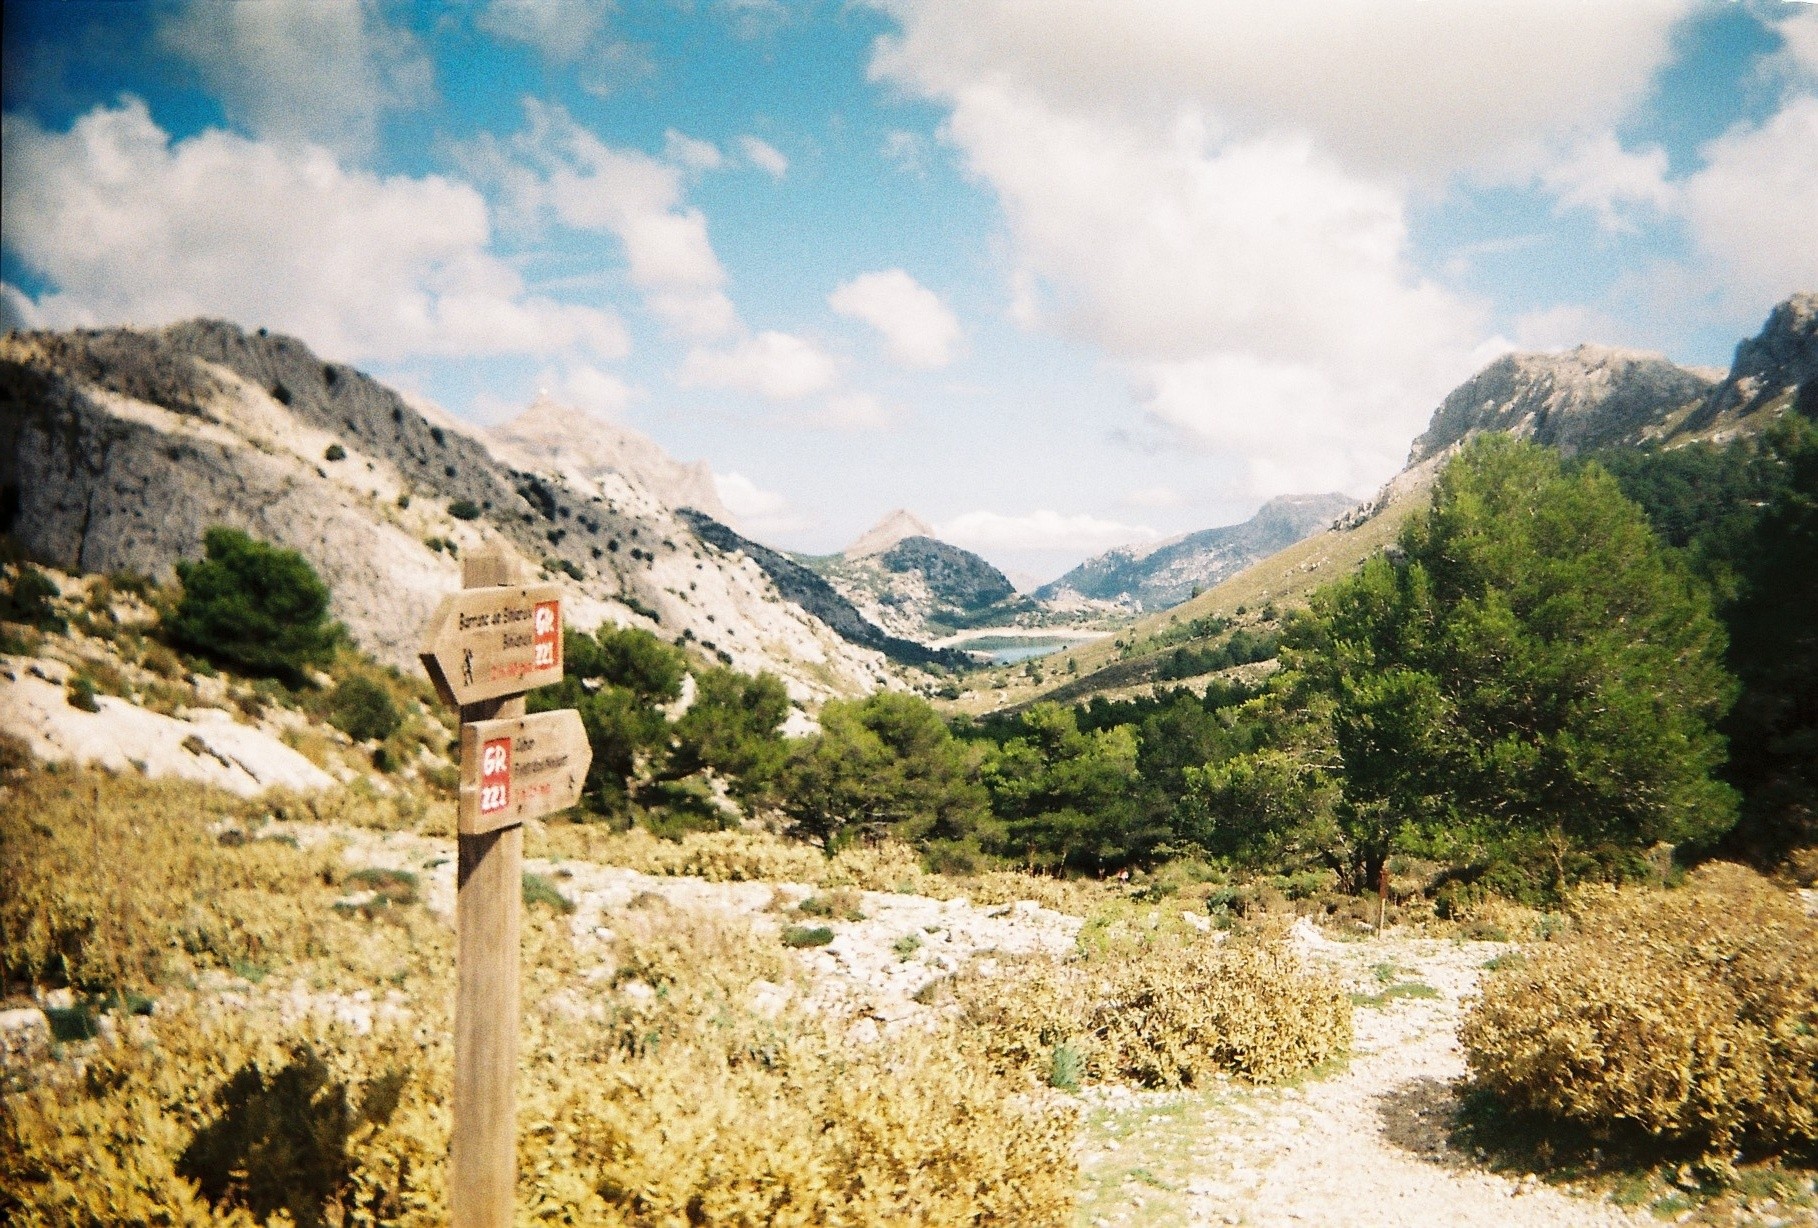 May 2019 | Hiking the GR221 in Mallorca.